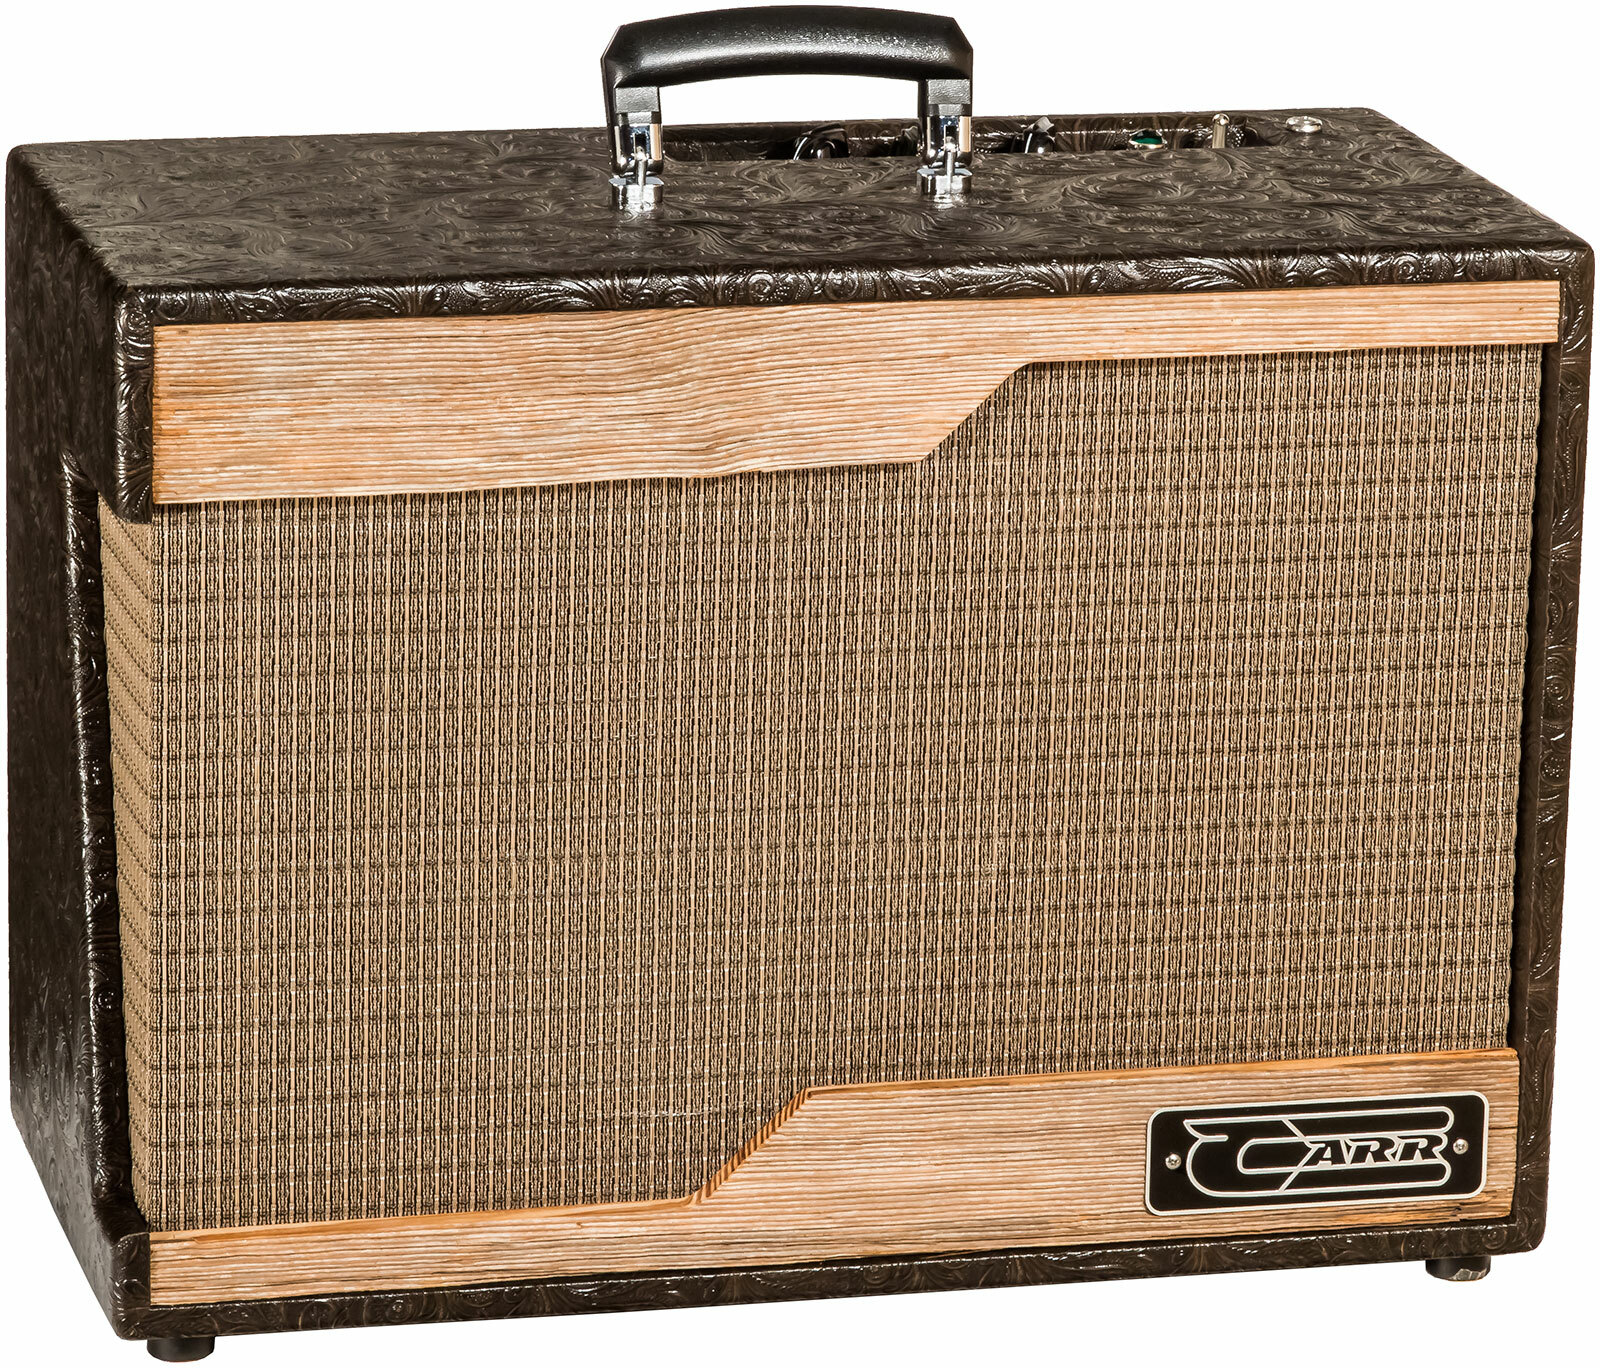 Carr Amplifiers Raleigh 1-12 Combo 5w 1x12 El84 Custom Cowboy - Electric guitar combo amp - Main picture